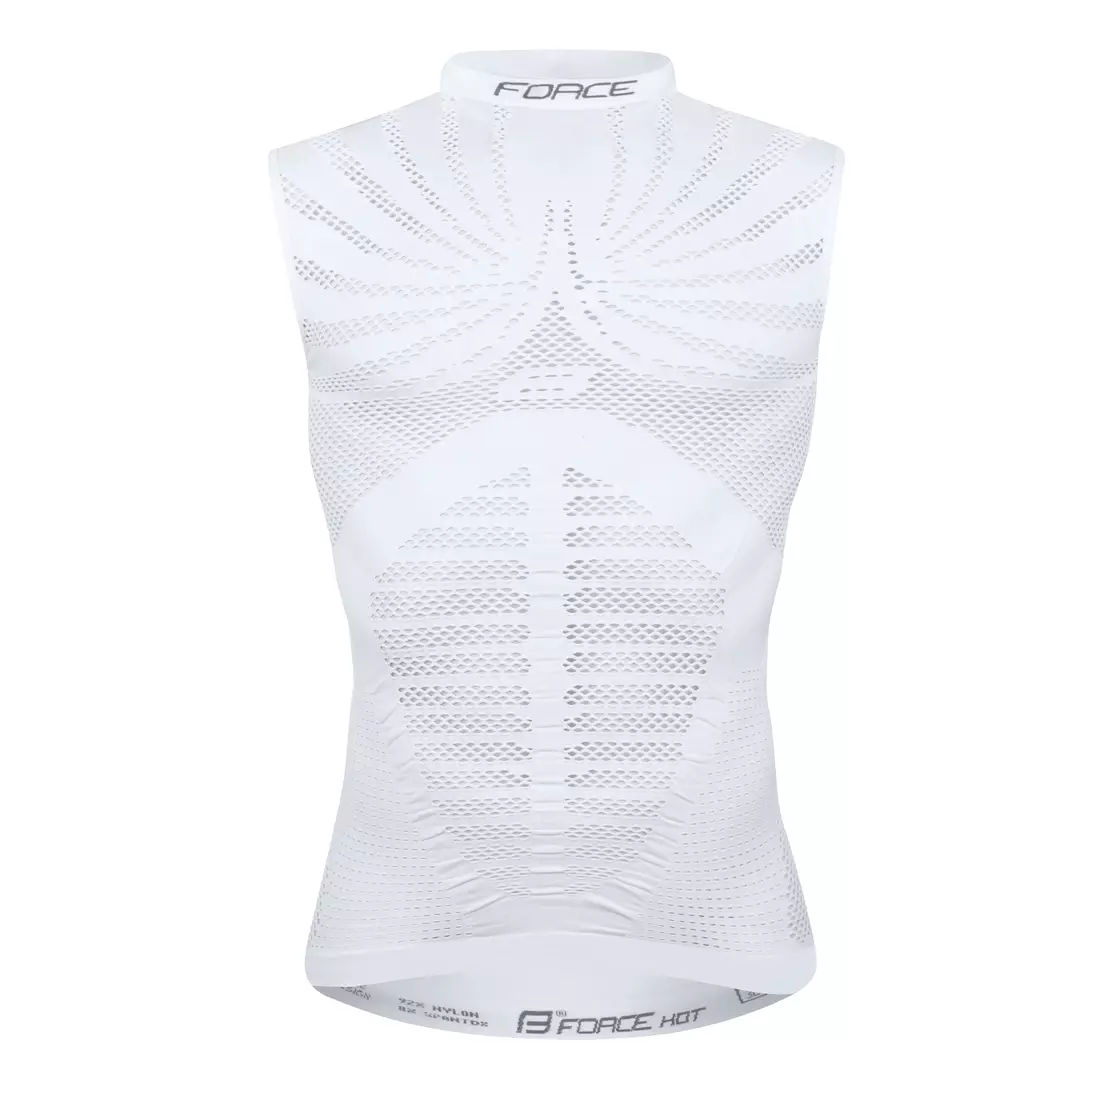 FORCE HOT light sweatshirt without sleeves - white 903400